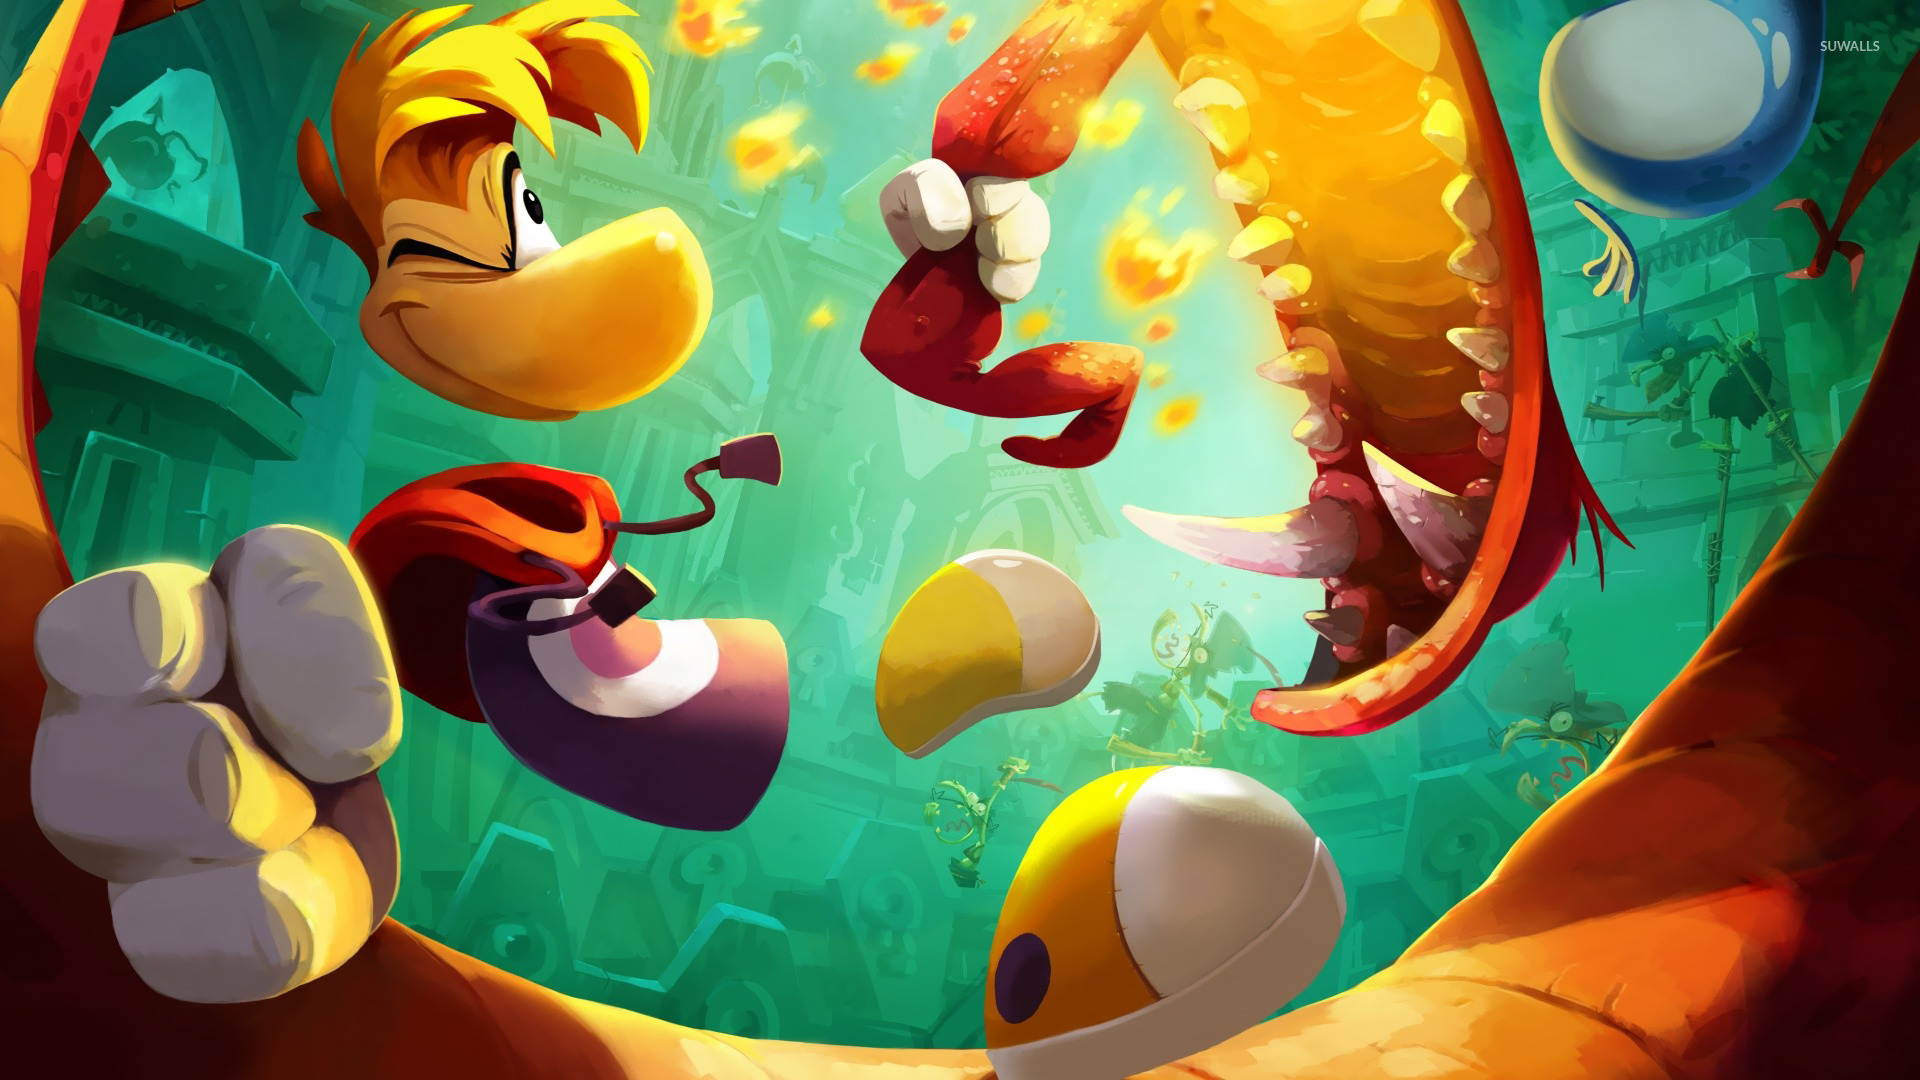 3840x2160 rayman legends 4k computer hd wallpapers free download